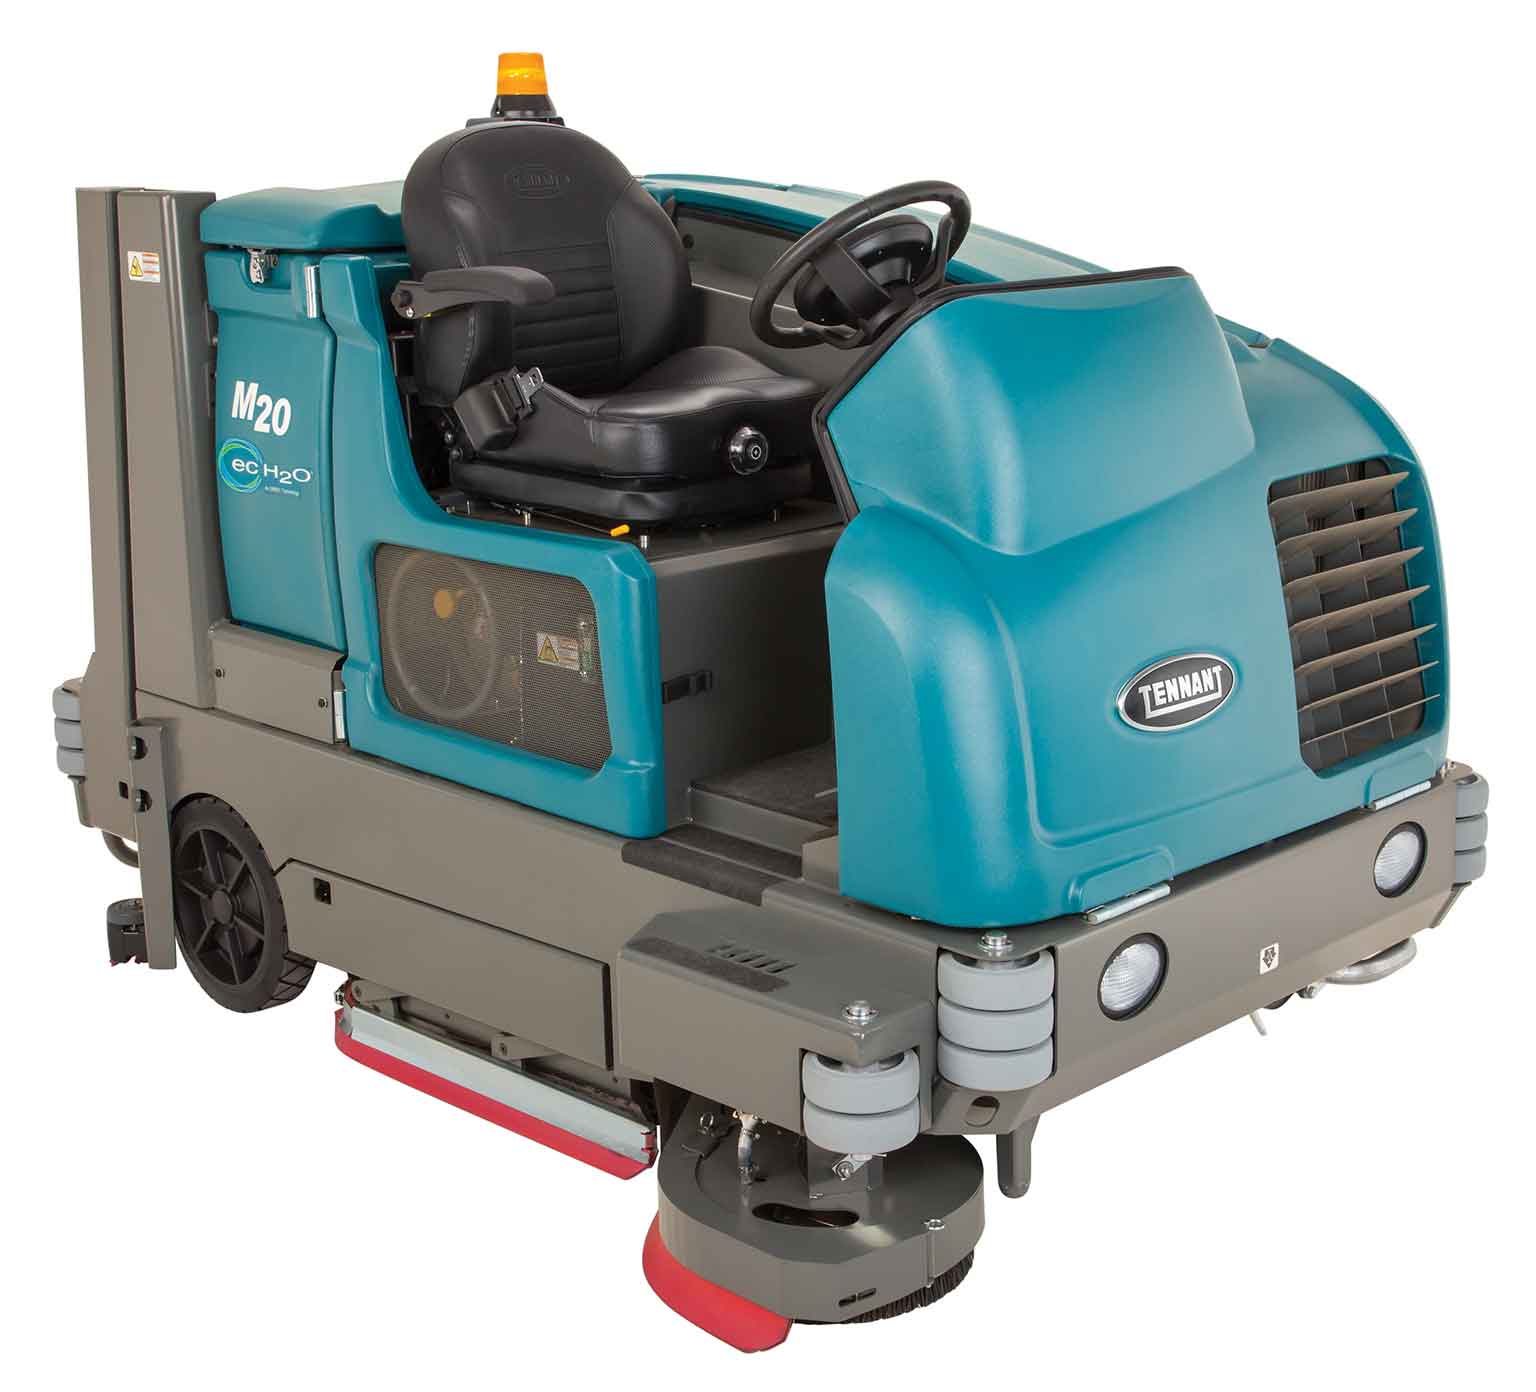 Tennant M20 Integrated Rider Sweeper-Scrubber